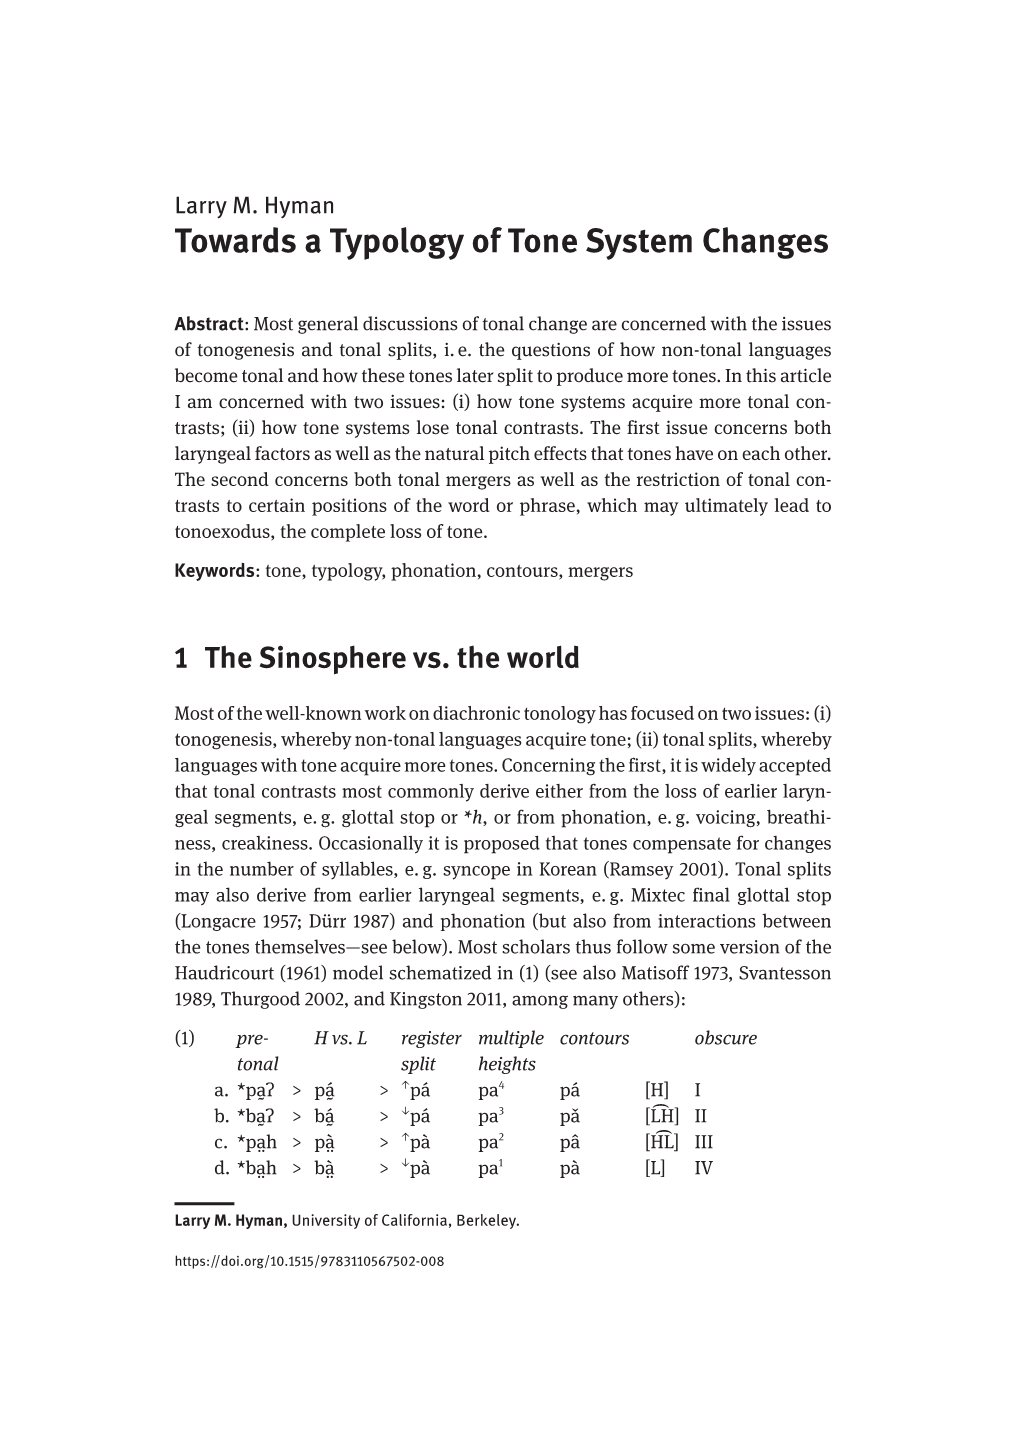 Towards a Typology of Tone System Changes